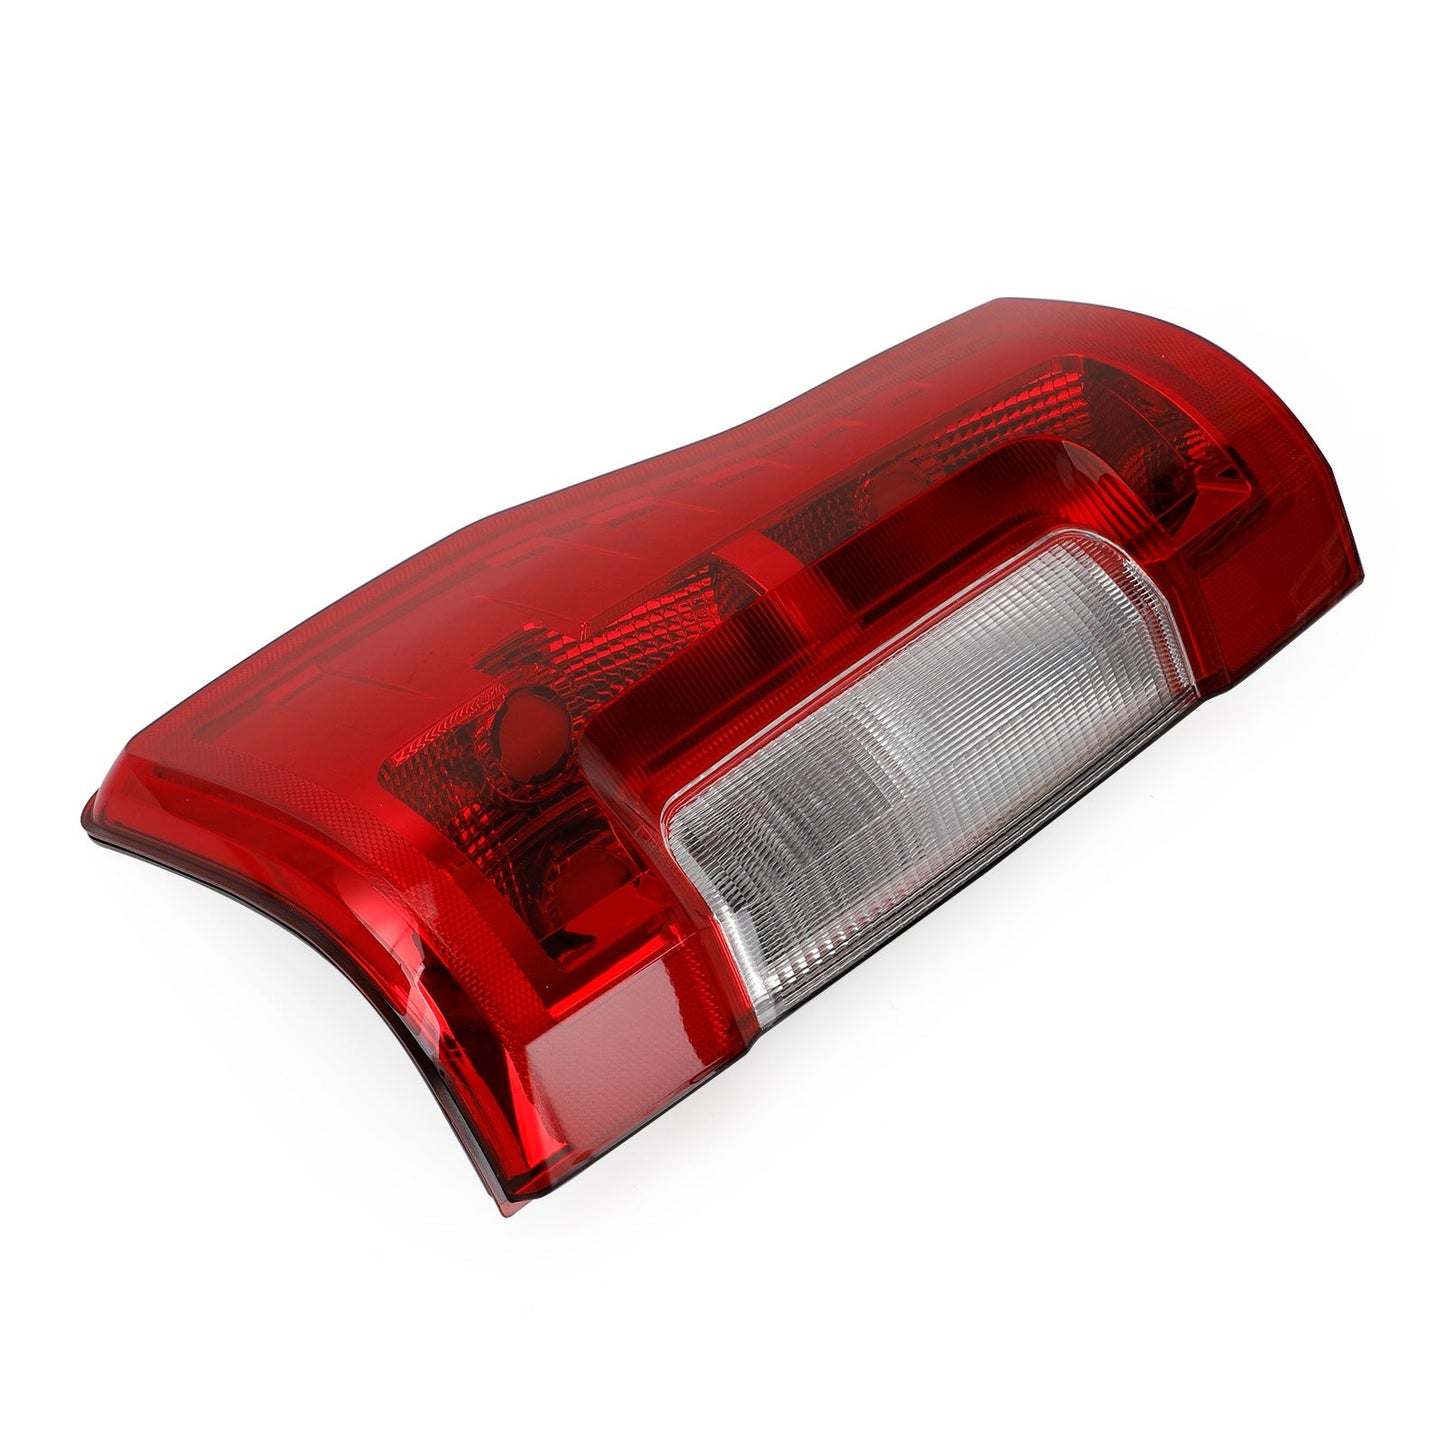 Ford F250 F350 SuperDuty 2017-2019 Right Tail Light w/o Blind Spot w/o LED FO2801256